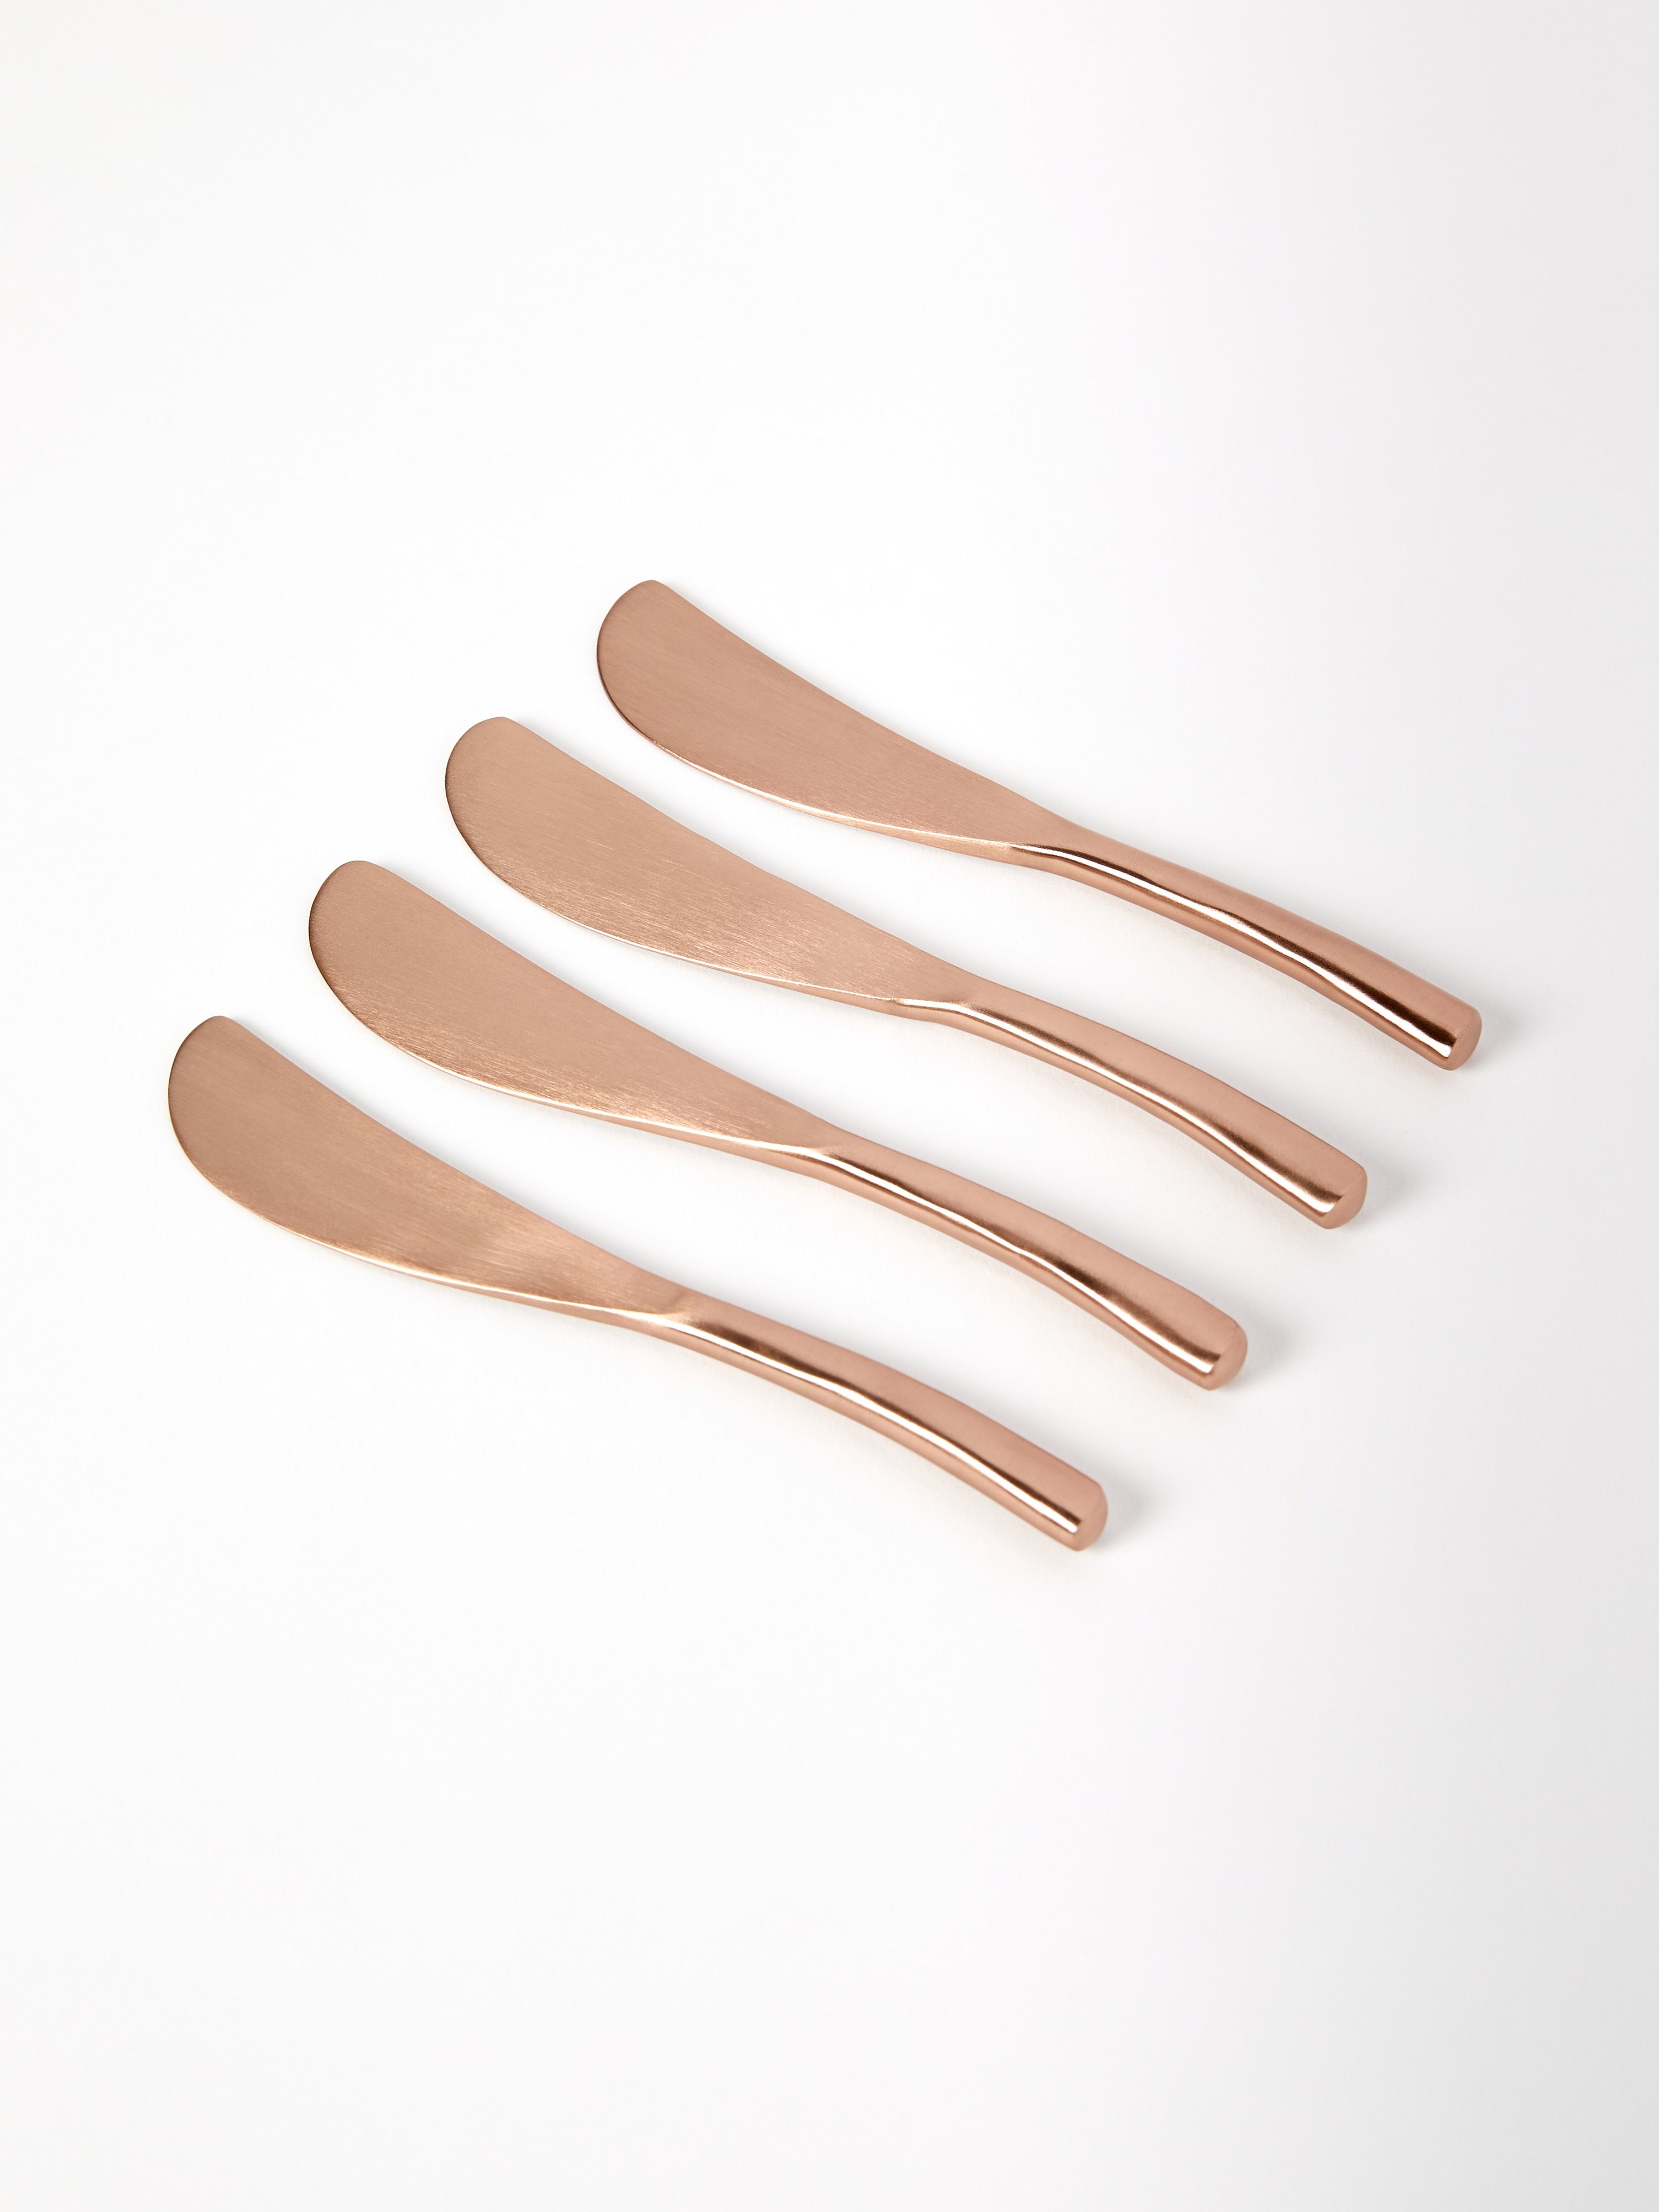 Be Home Streamlined Spreaders, Set Of 4 In Rose Gold